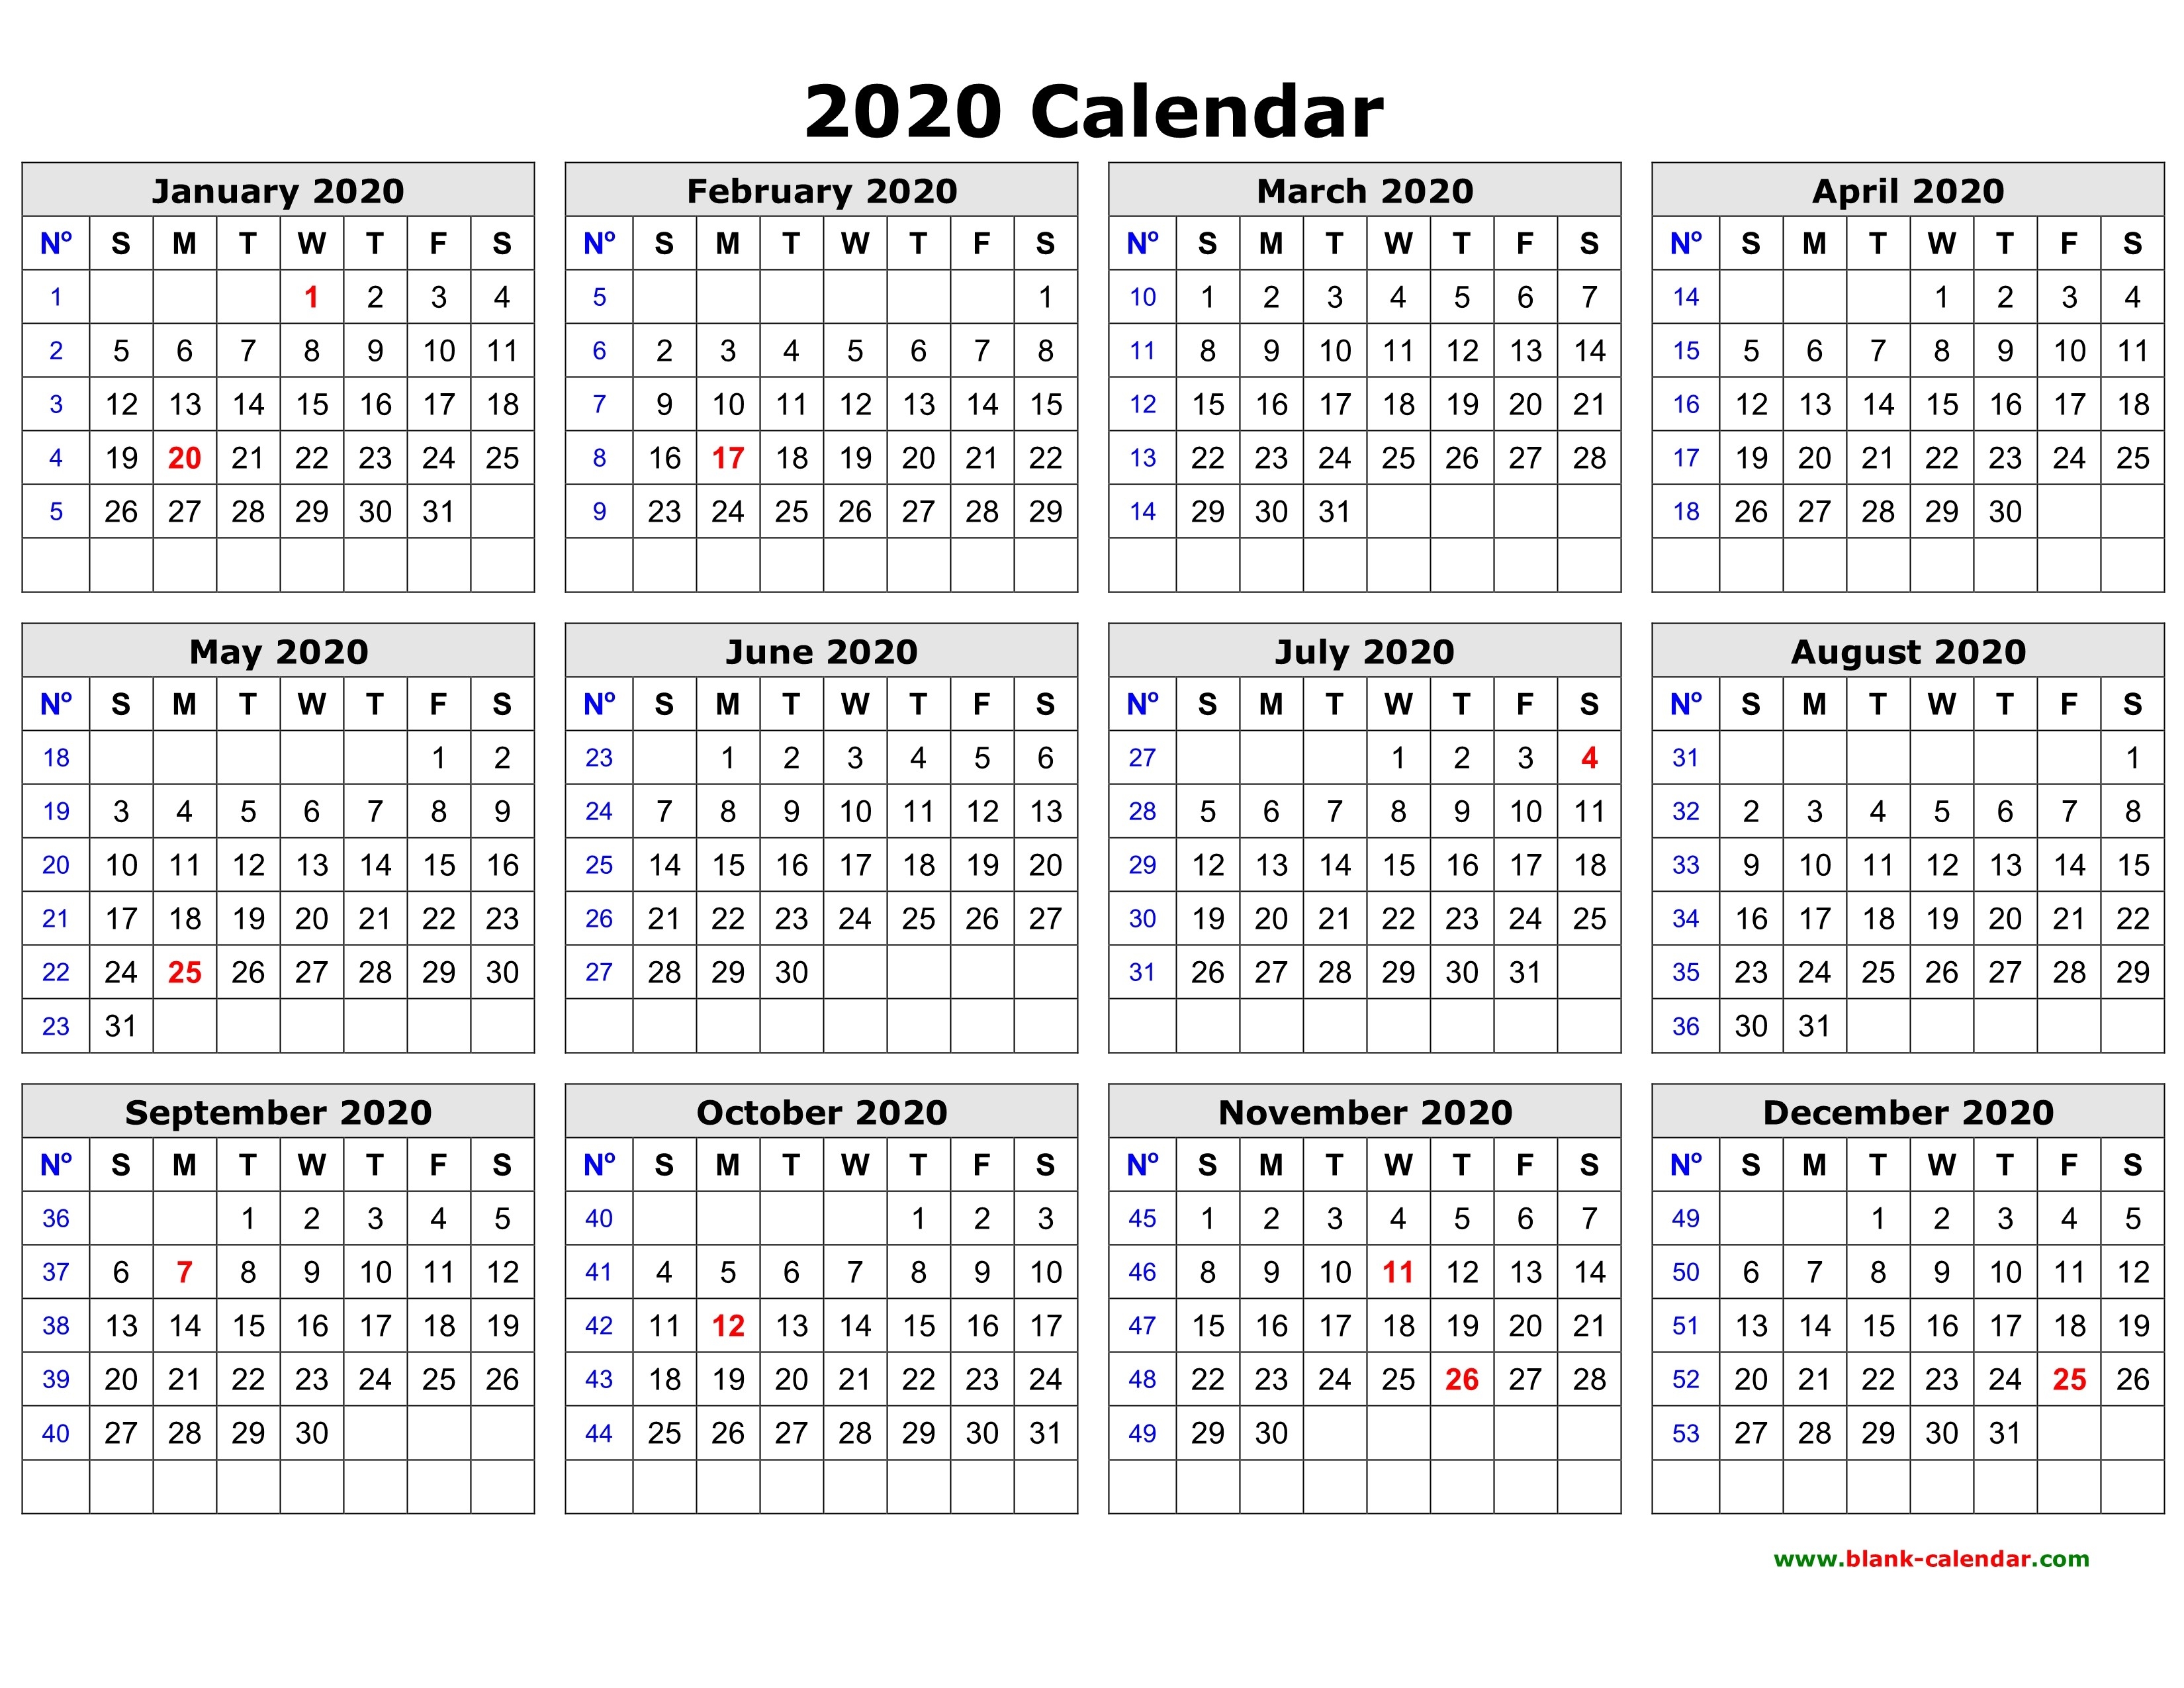 Free Download Printable Calendar 2020 In One Page, Clean Design.-2020 Calendar 4 Month Template